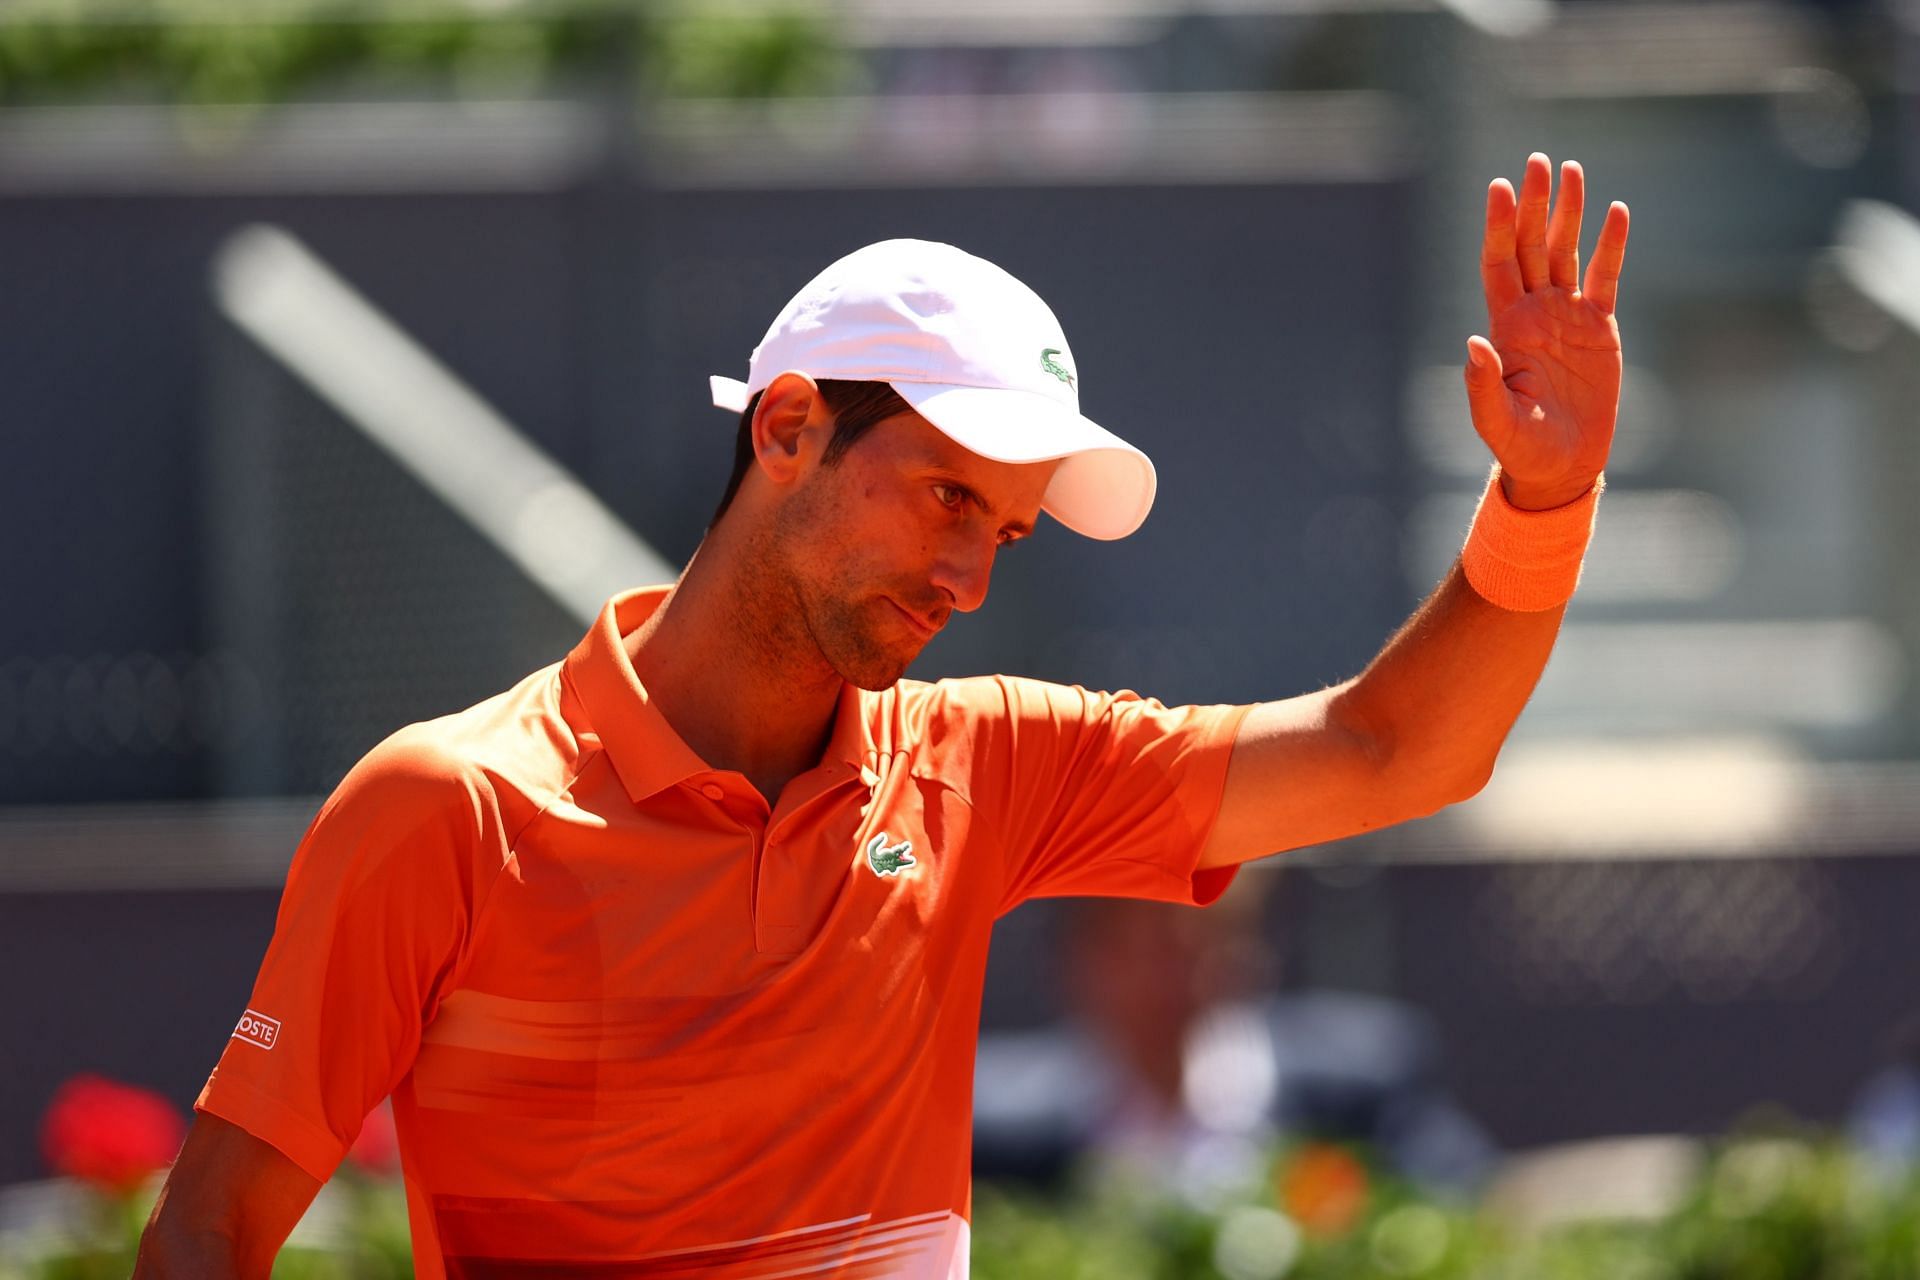 Novak Djokovic will face Carlos Alcaraz for the very first time